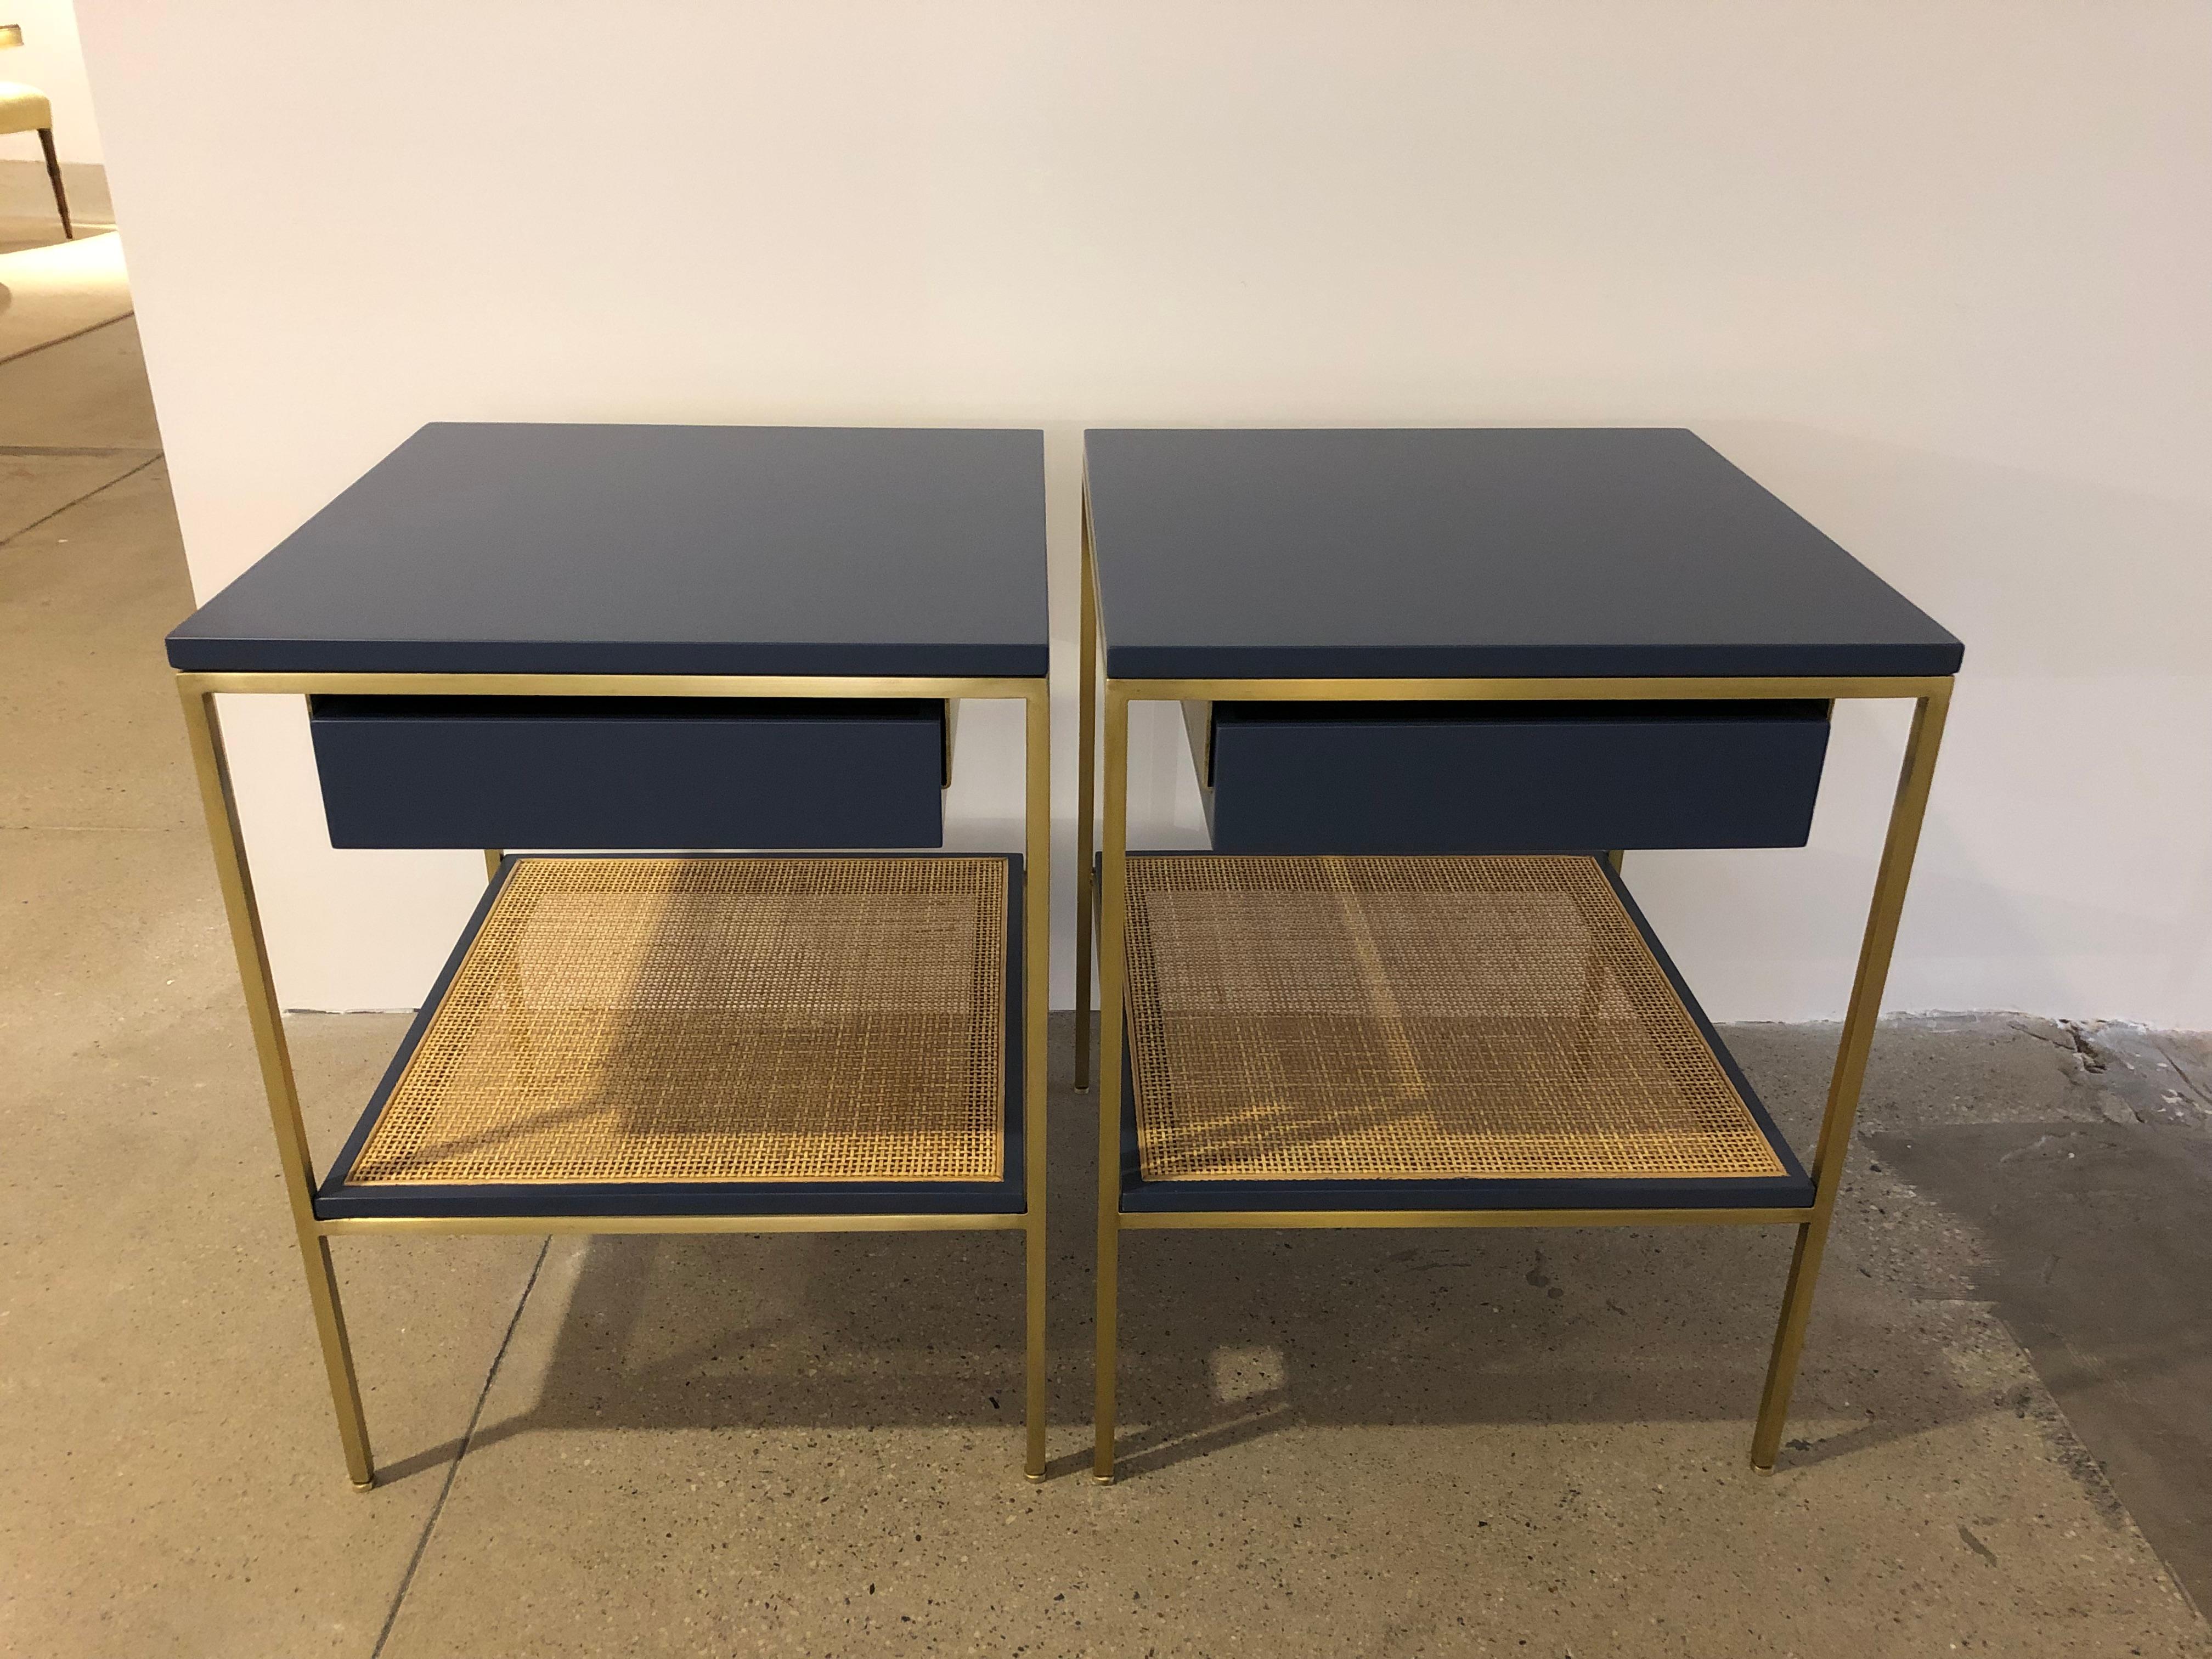 Minimalist Re 392 Bedside Table in Kensington Blue on Satin Brass Frame with Caned Shelf For Sale